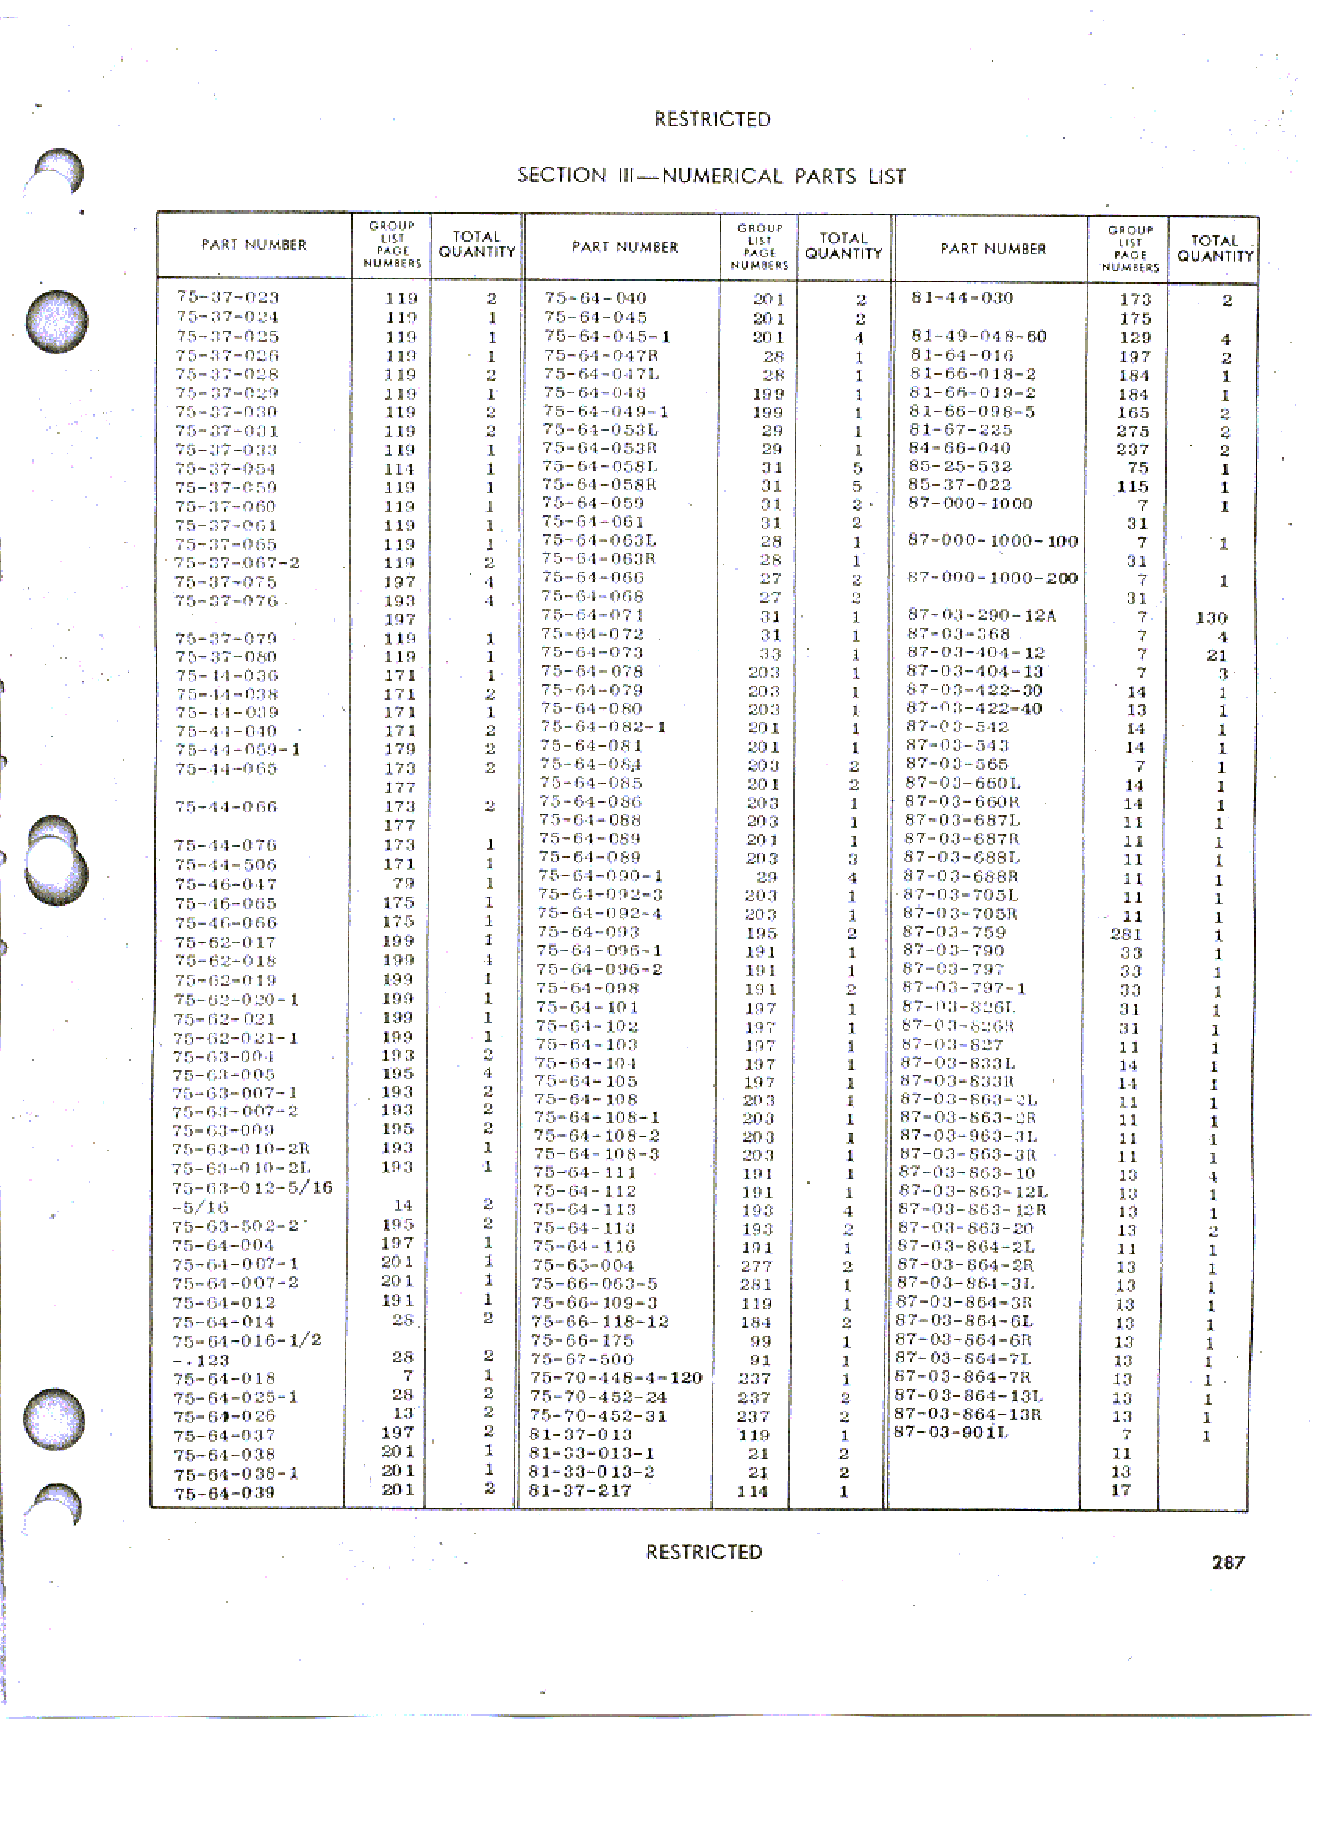 Sample page 292 from AirCorps Library document: Parts Catalog - P-40M P-40N